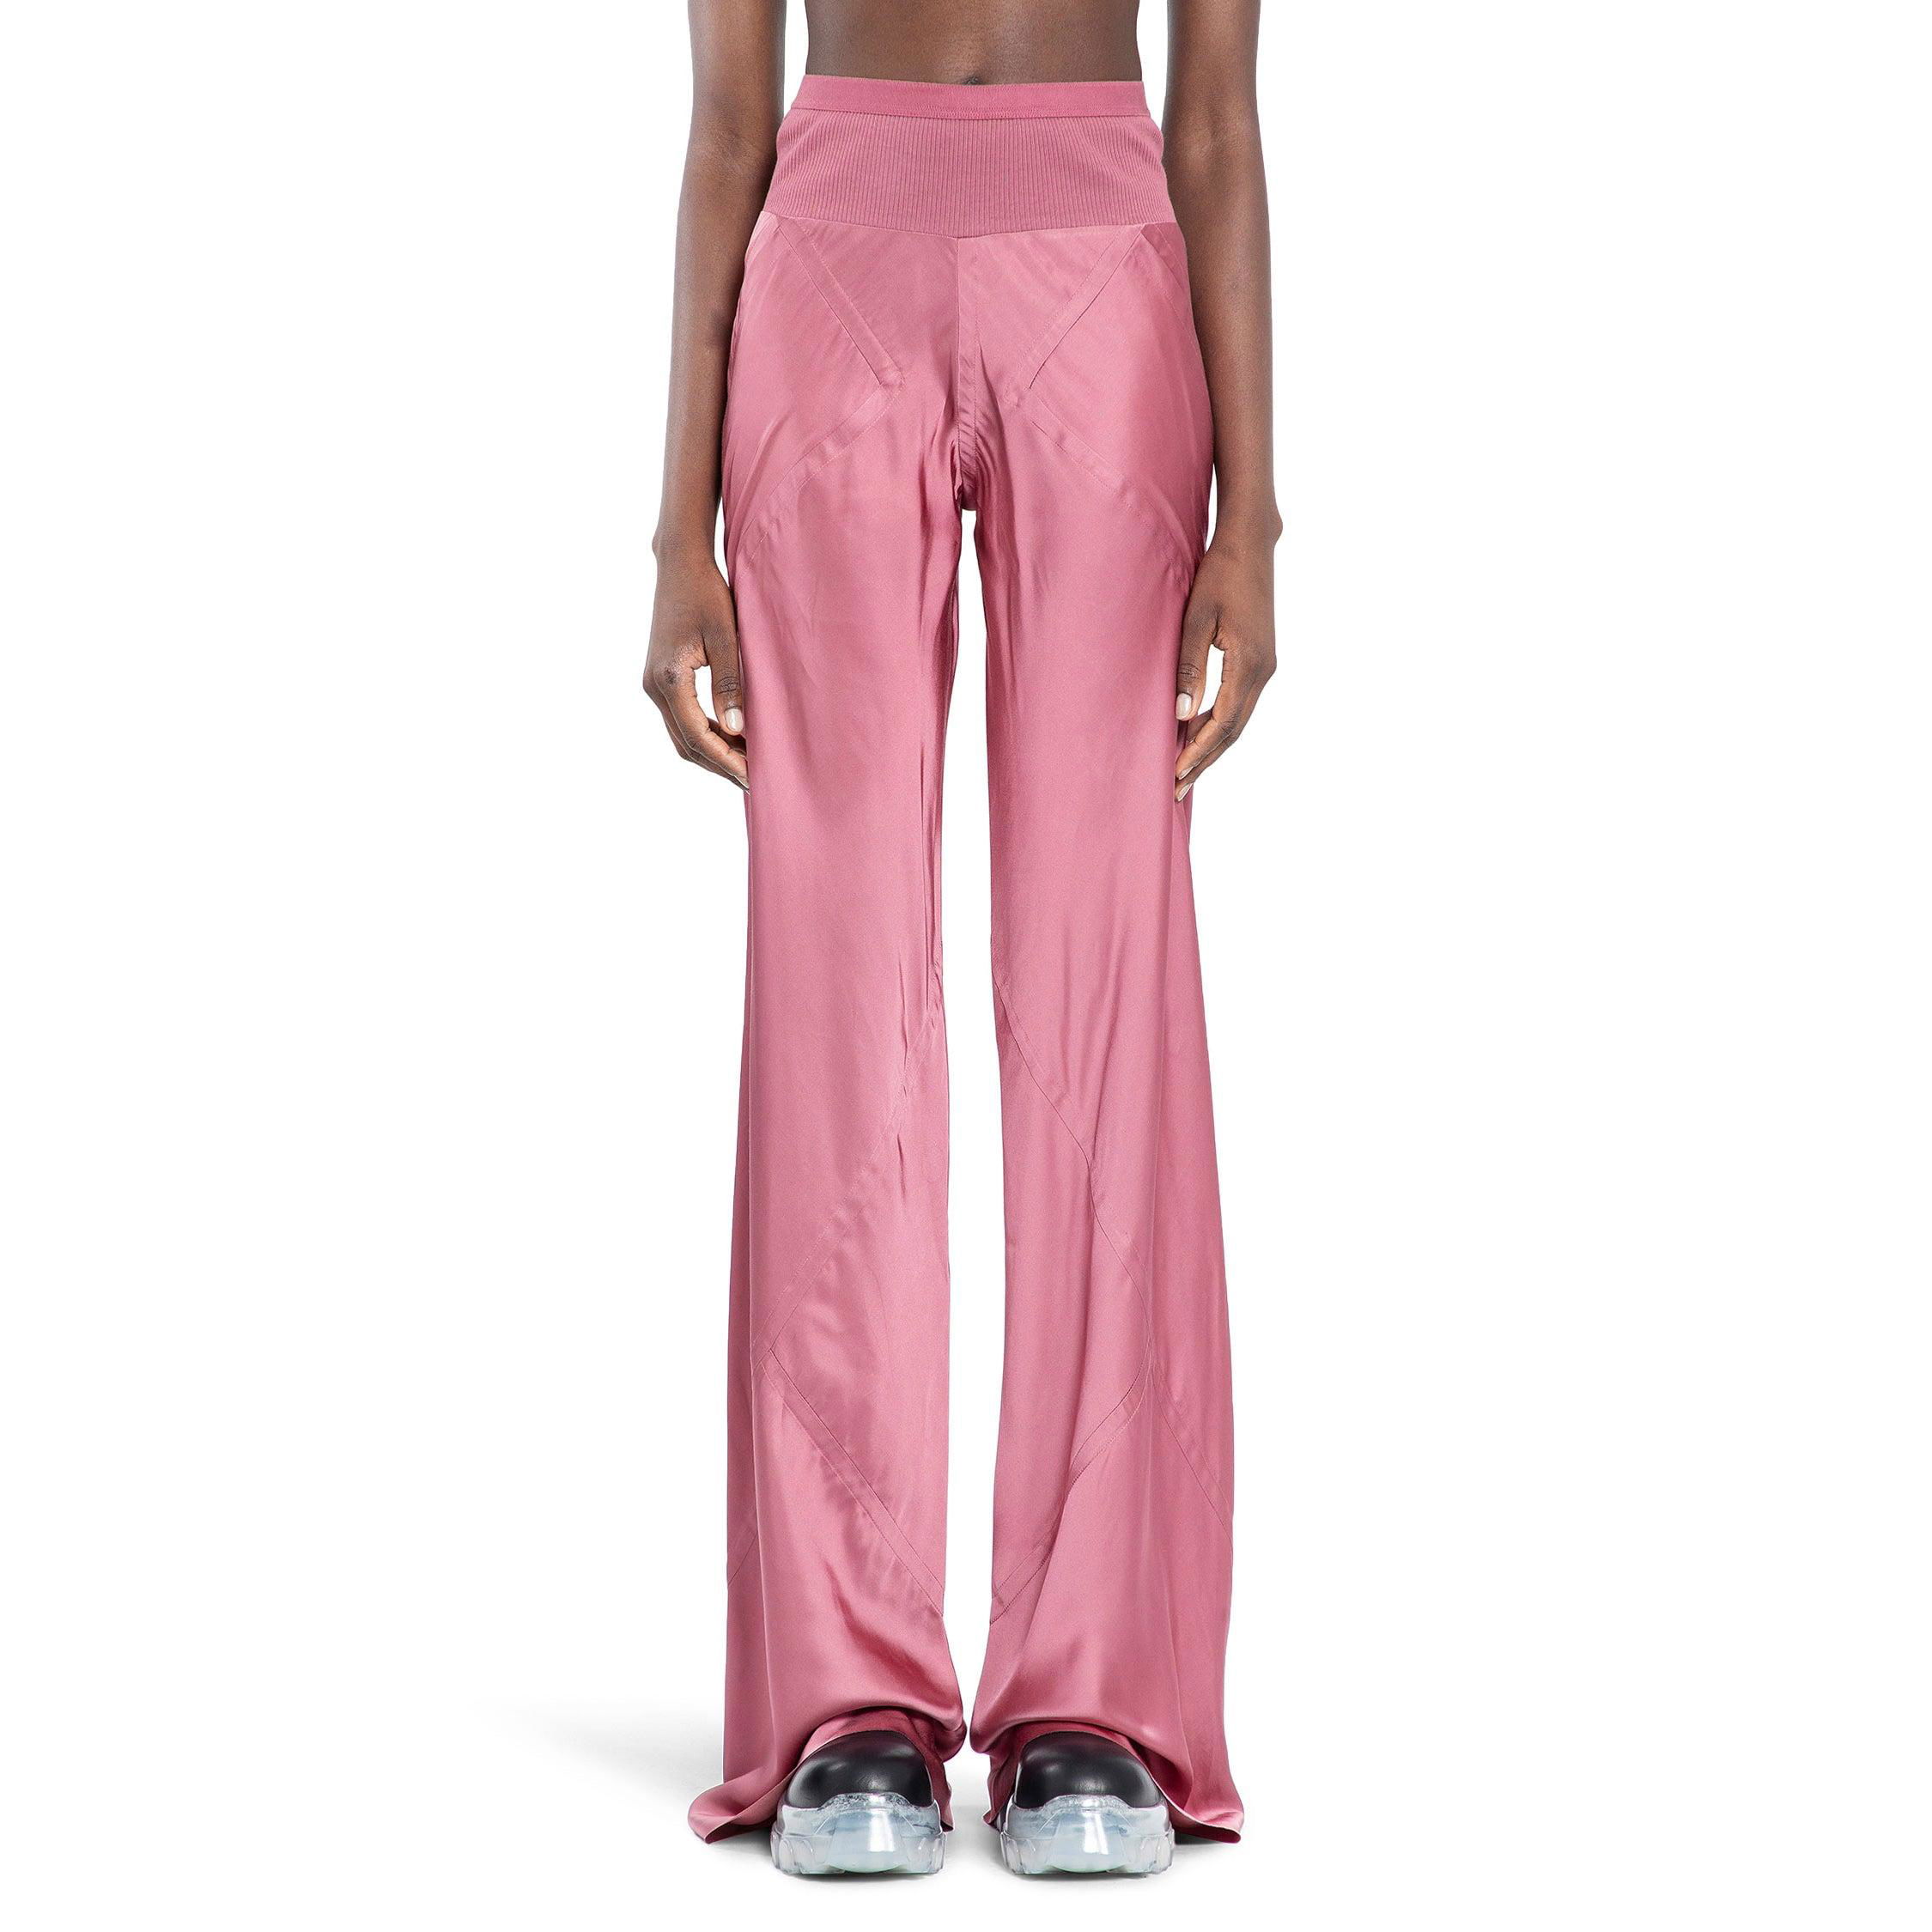 RICK OWENS WOMAN PINK TROUSERS by RICK OWENS